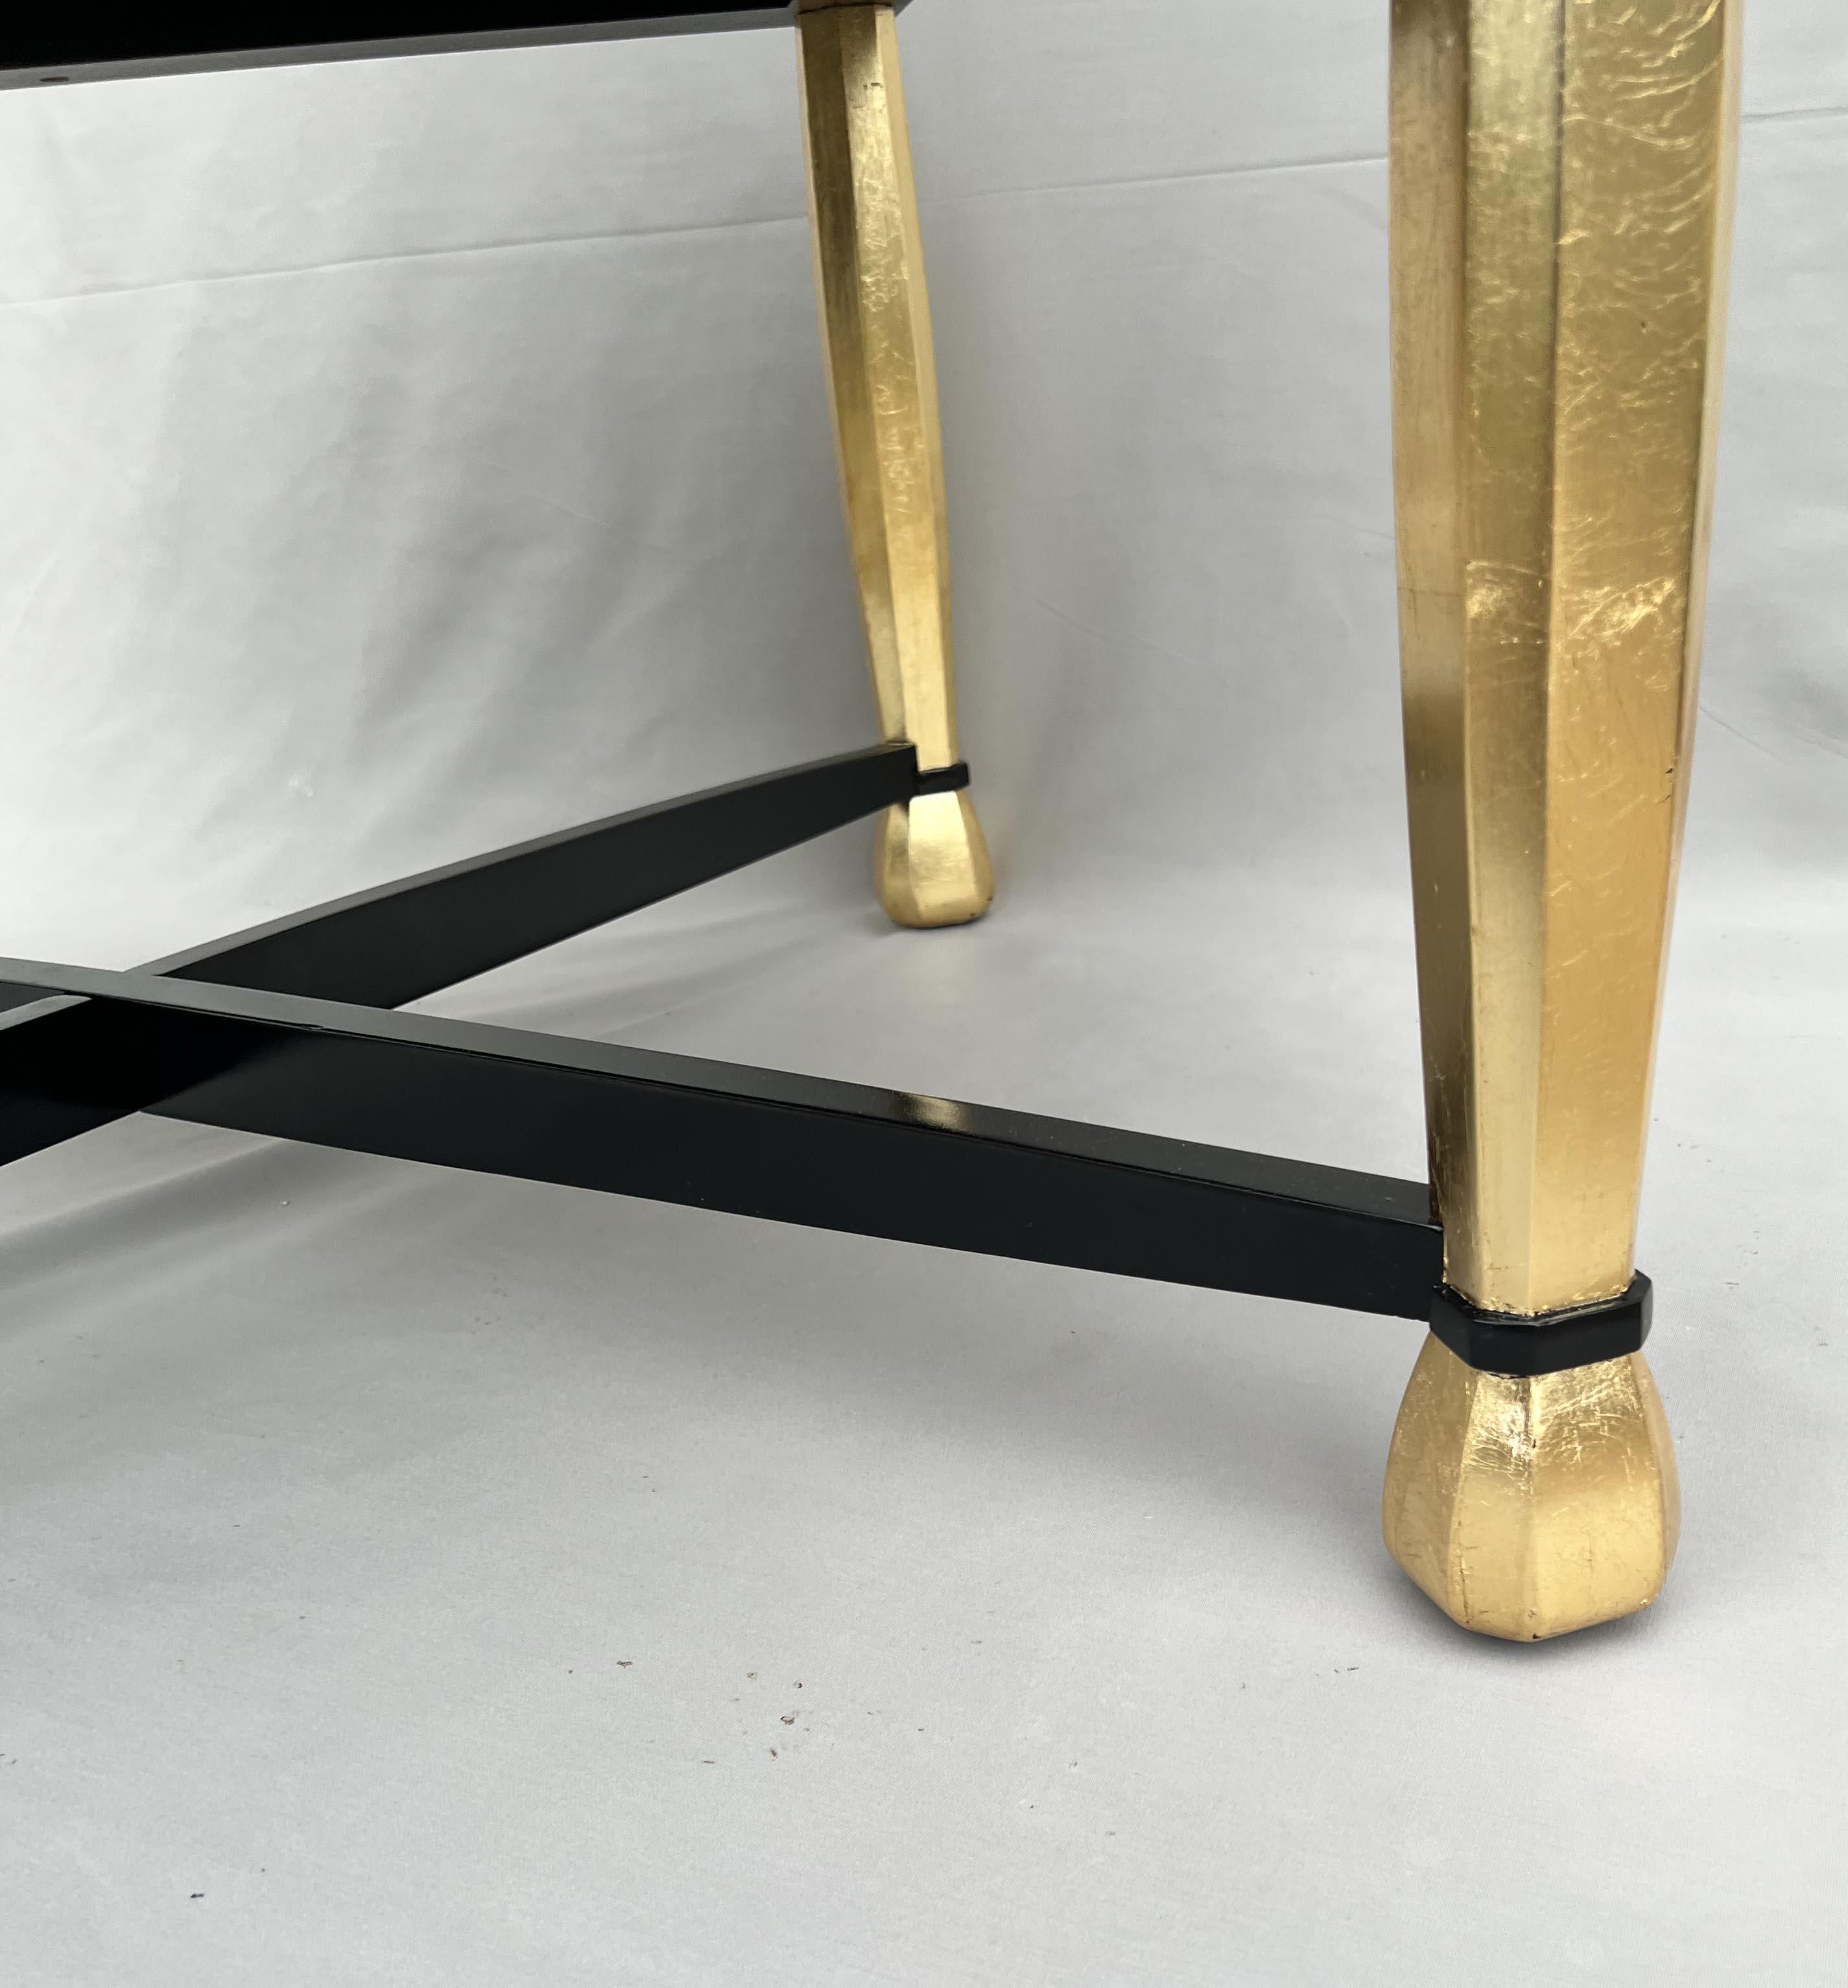 Art Deco Coffee Table in Giltwood and Black Lacquer, 1930s For Sale 7